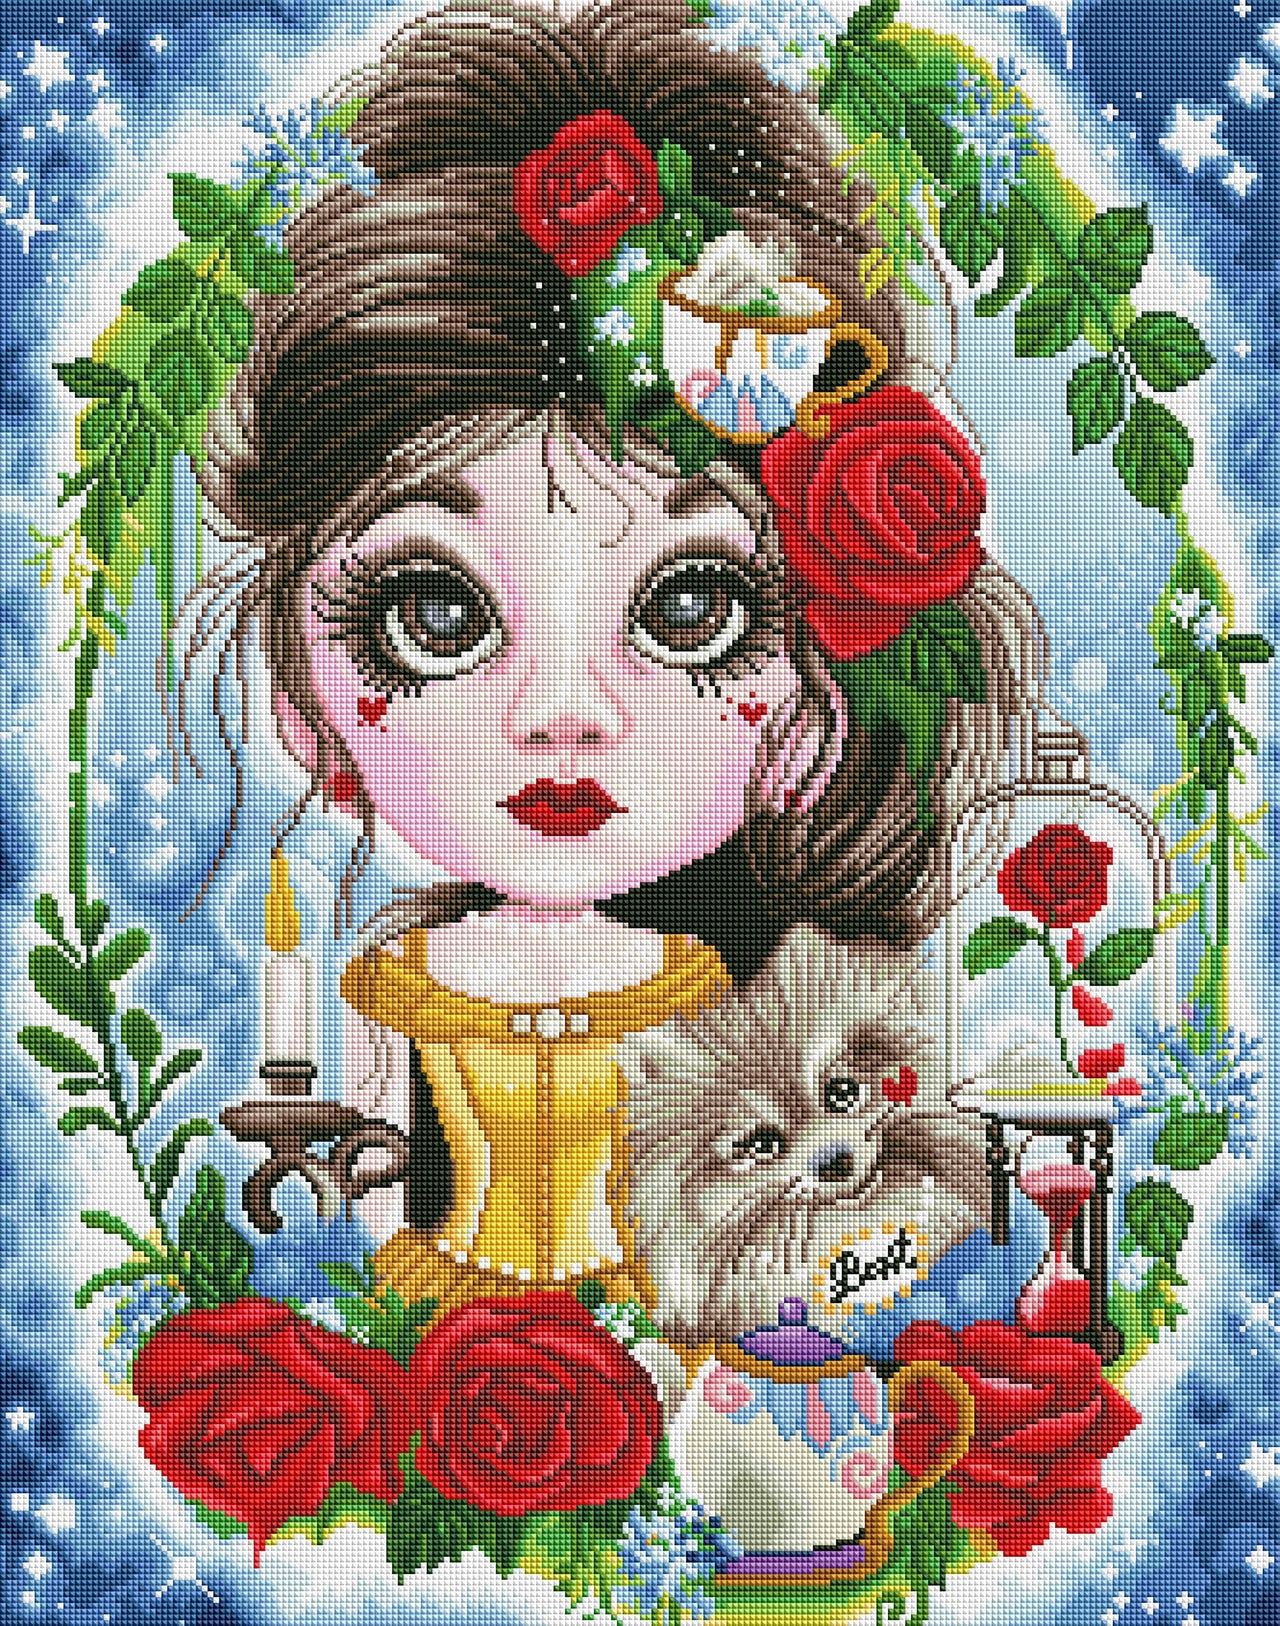 Diamond Painting A Beauty And Her Beast 22" x 28″ (56cm x 71cm) / Square with 53 Colors including 2 ABs / 62,604